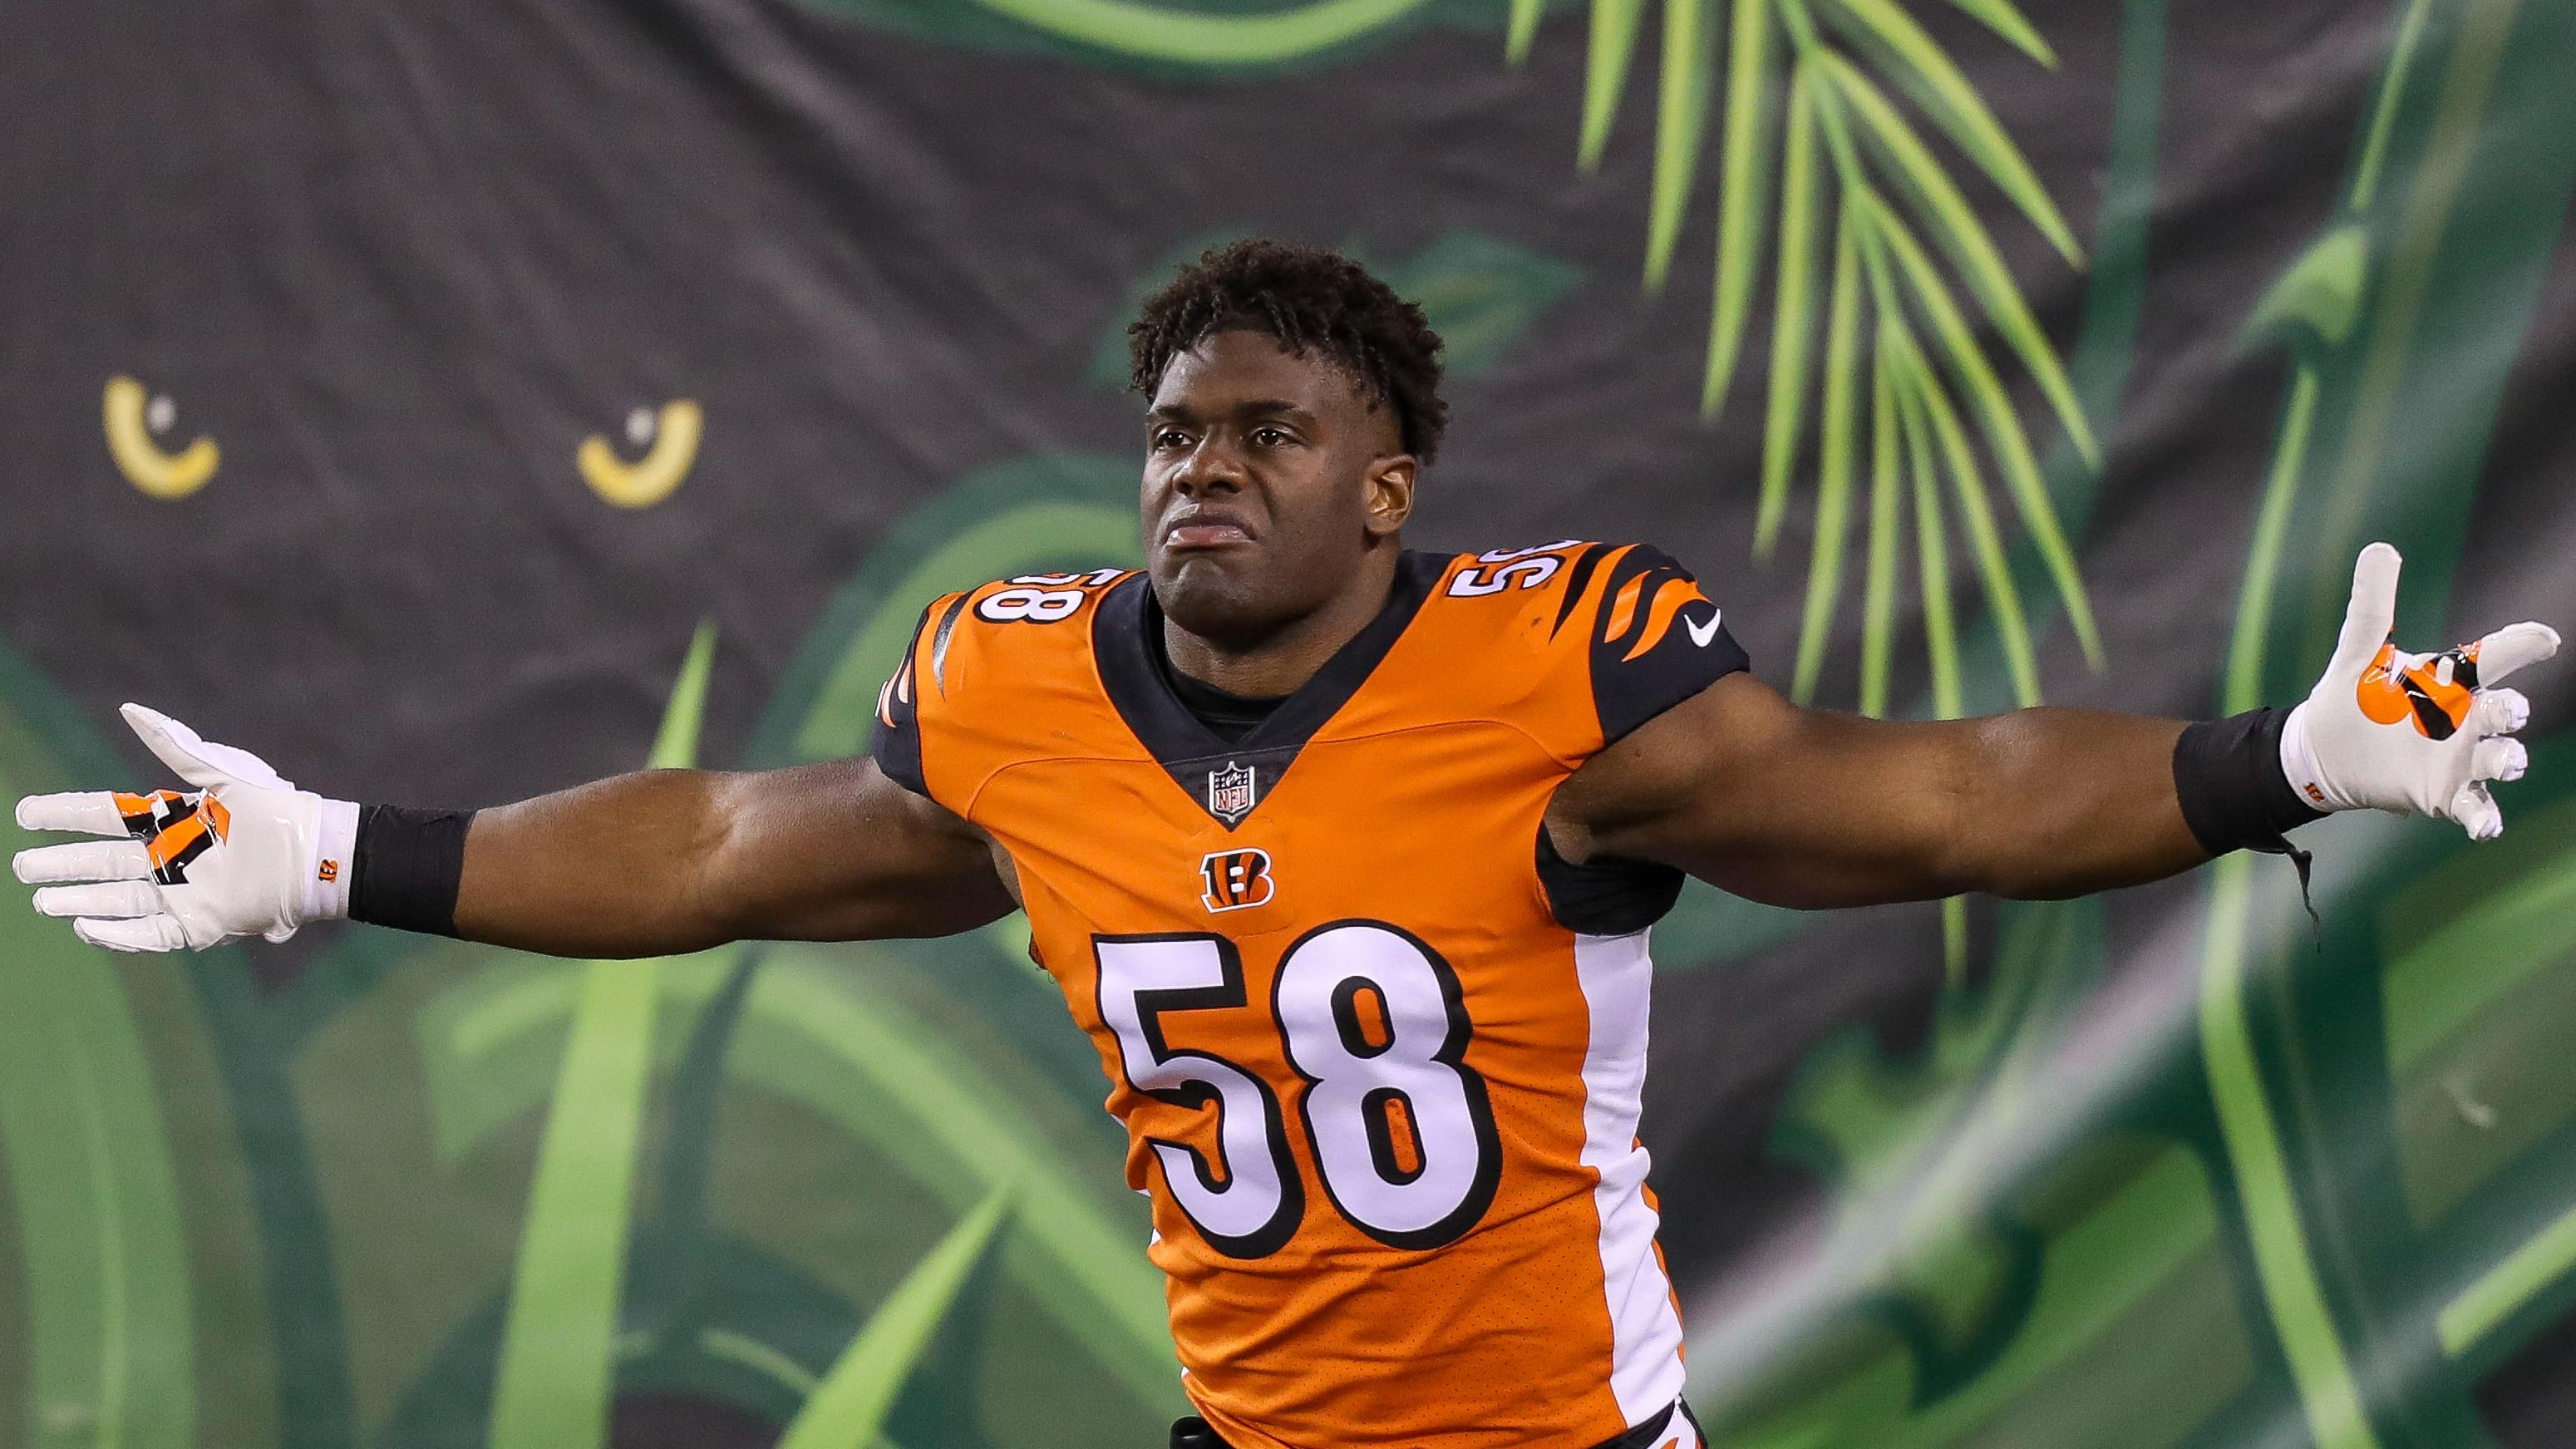 Cincinnati Bengals defensive end Carl Lawson (58) reacts while running onto the field prior to the game against the Pittsburgh Steelers at Paul Brown Stadium. / USA TODAY Sports